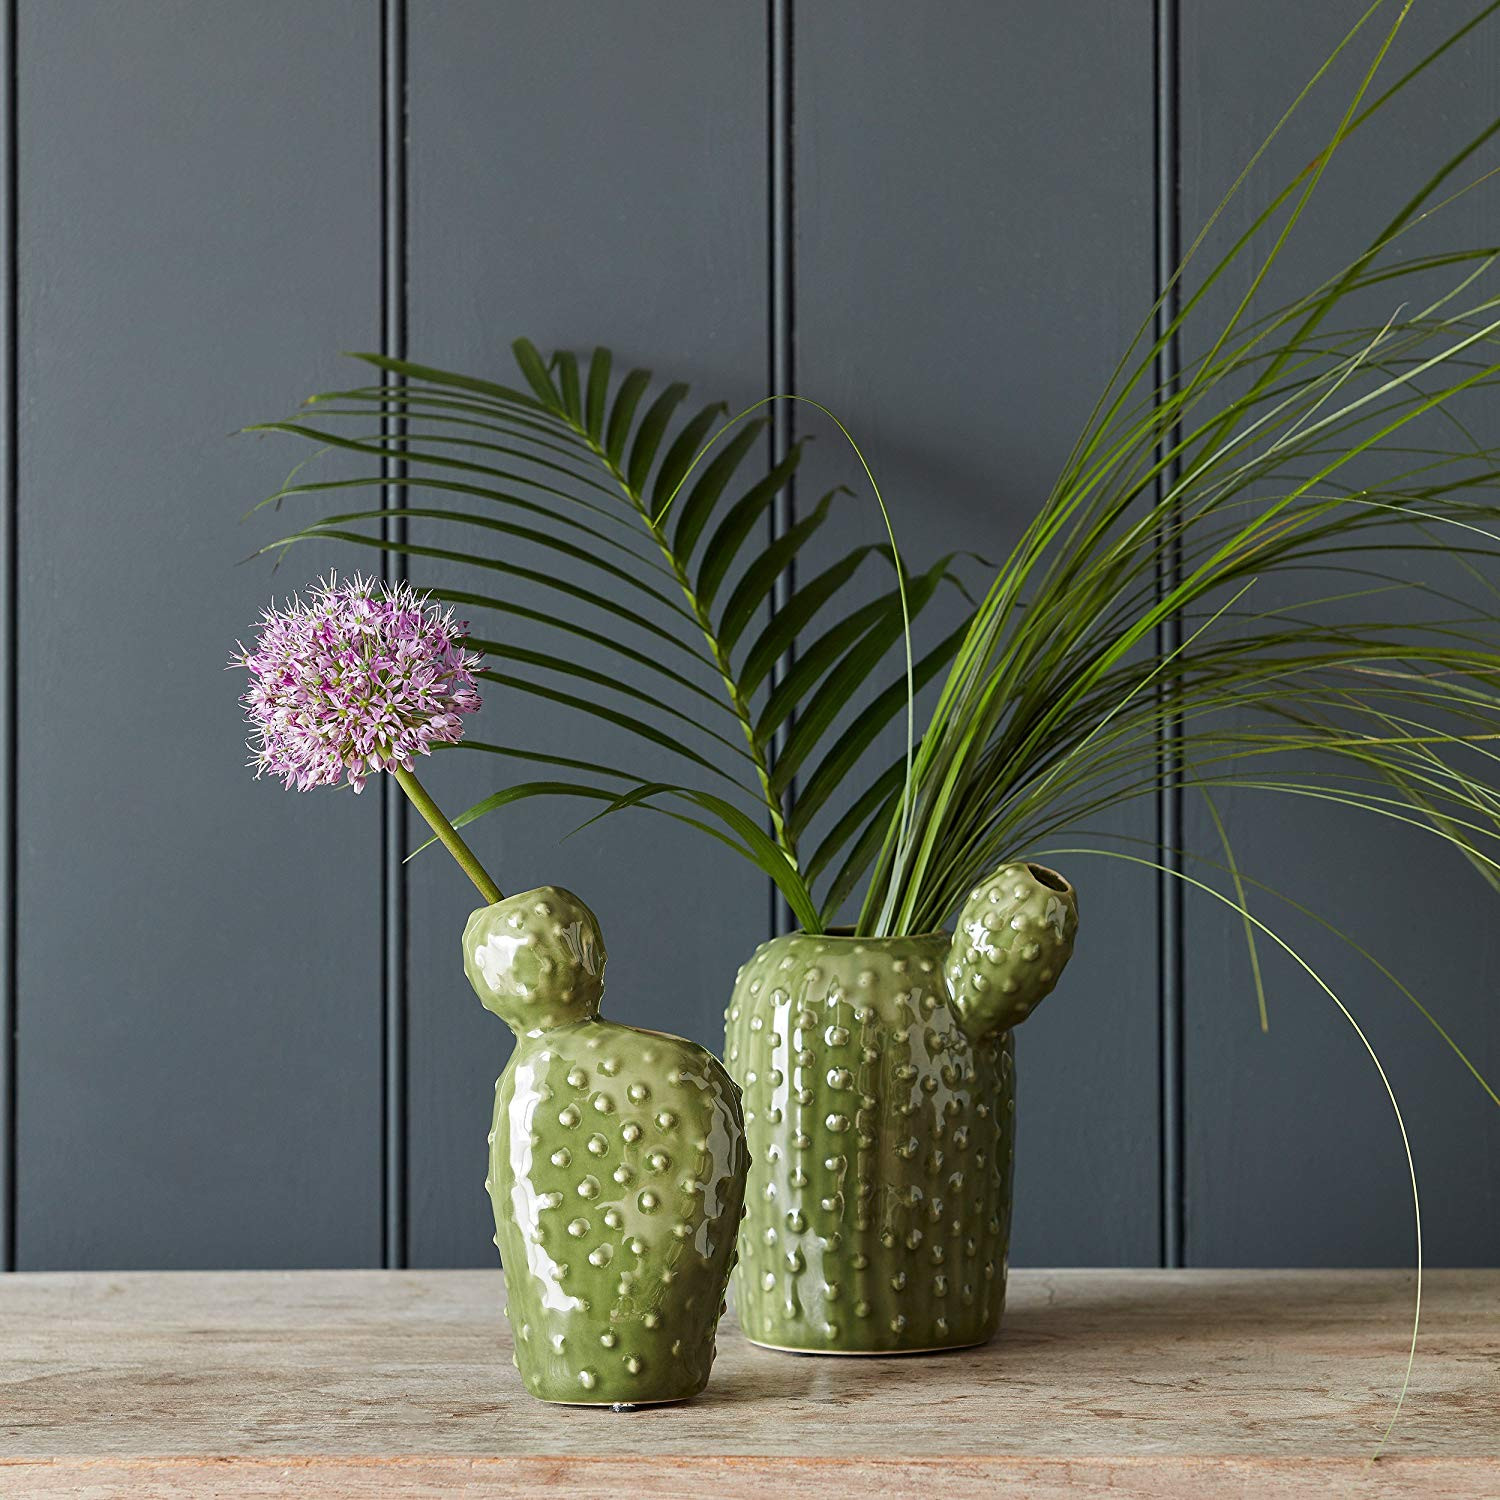 30 Spectacular Waterford Honey Bud Vase 2024 free download waterford honey bud vase of amazon com burgon ball ceramic cactus shaped vase pot in small throughout amazon com burgon ball ceramic cactus shaped vase pot in small home kitchen